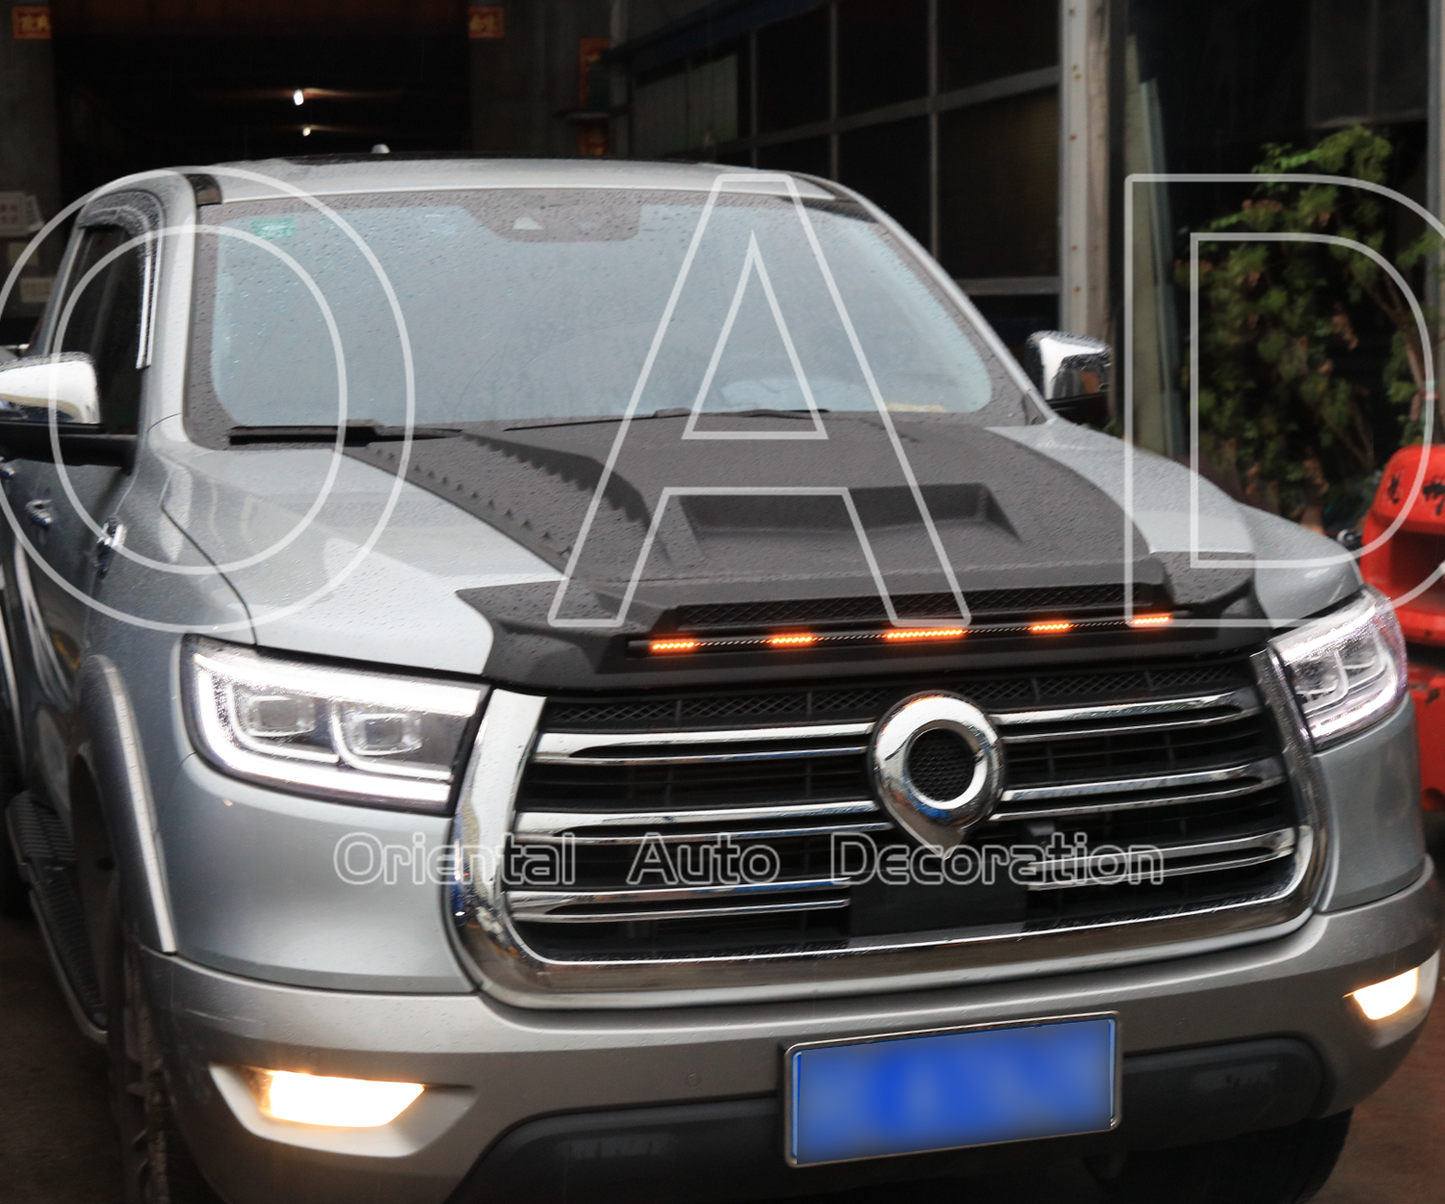 LED Light Bonnet Protector Hood Protector for GWM Cannon All Models